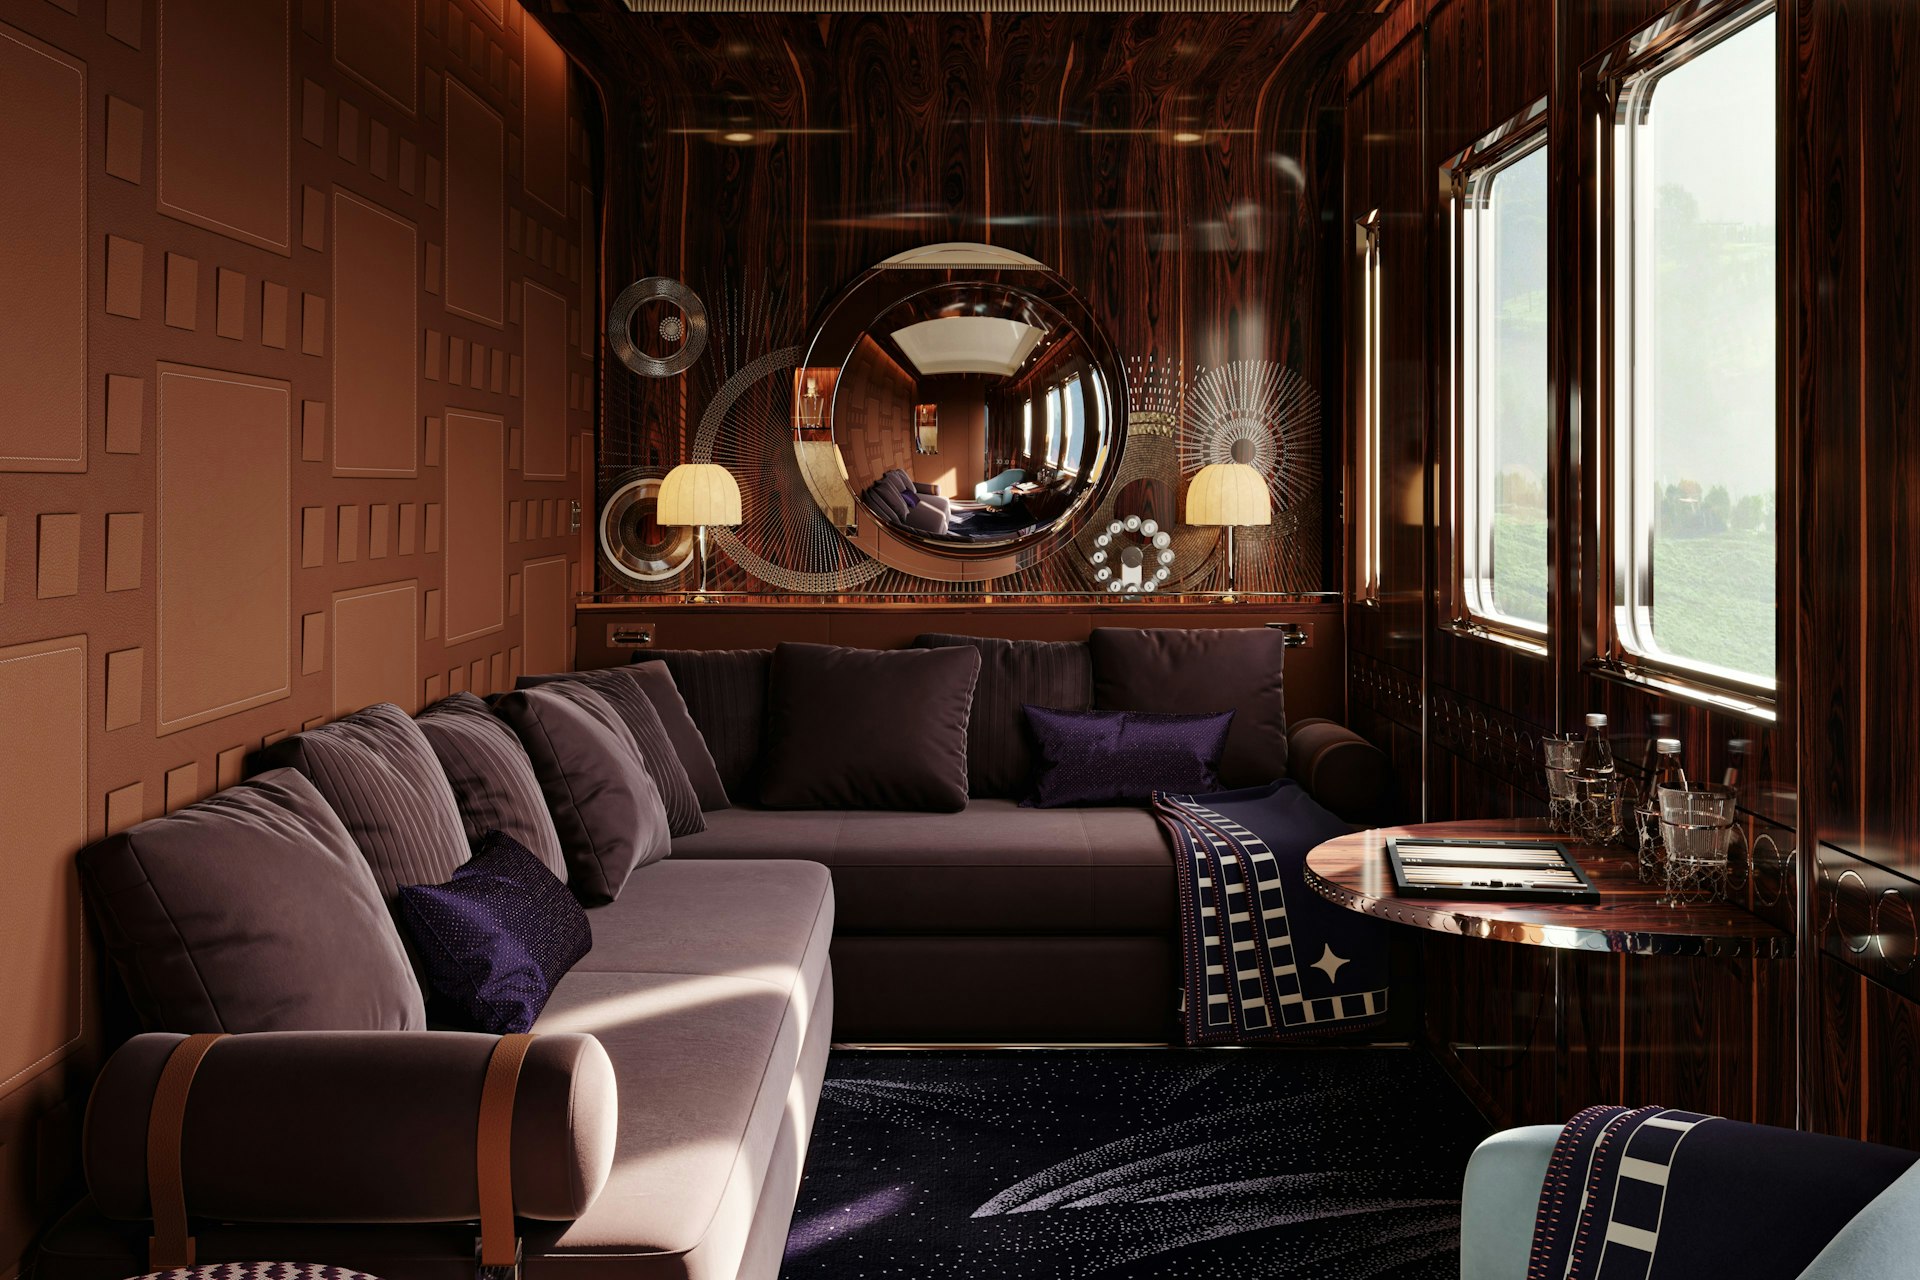 Orient Express cabin with purple interiors.jpg